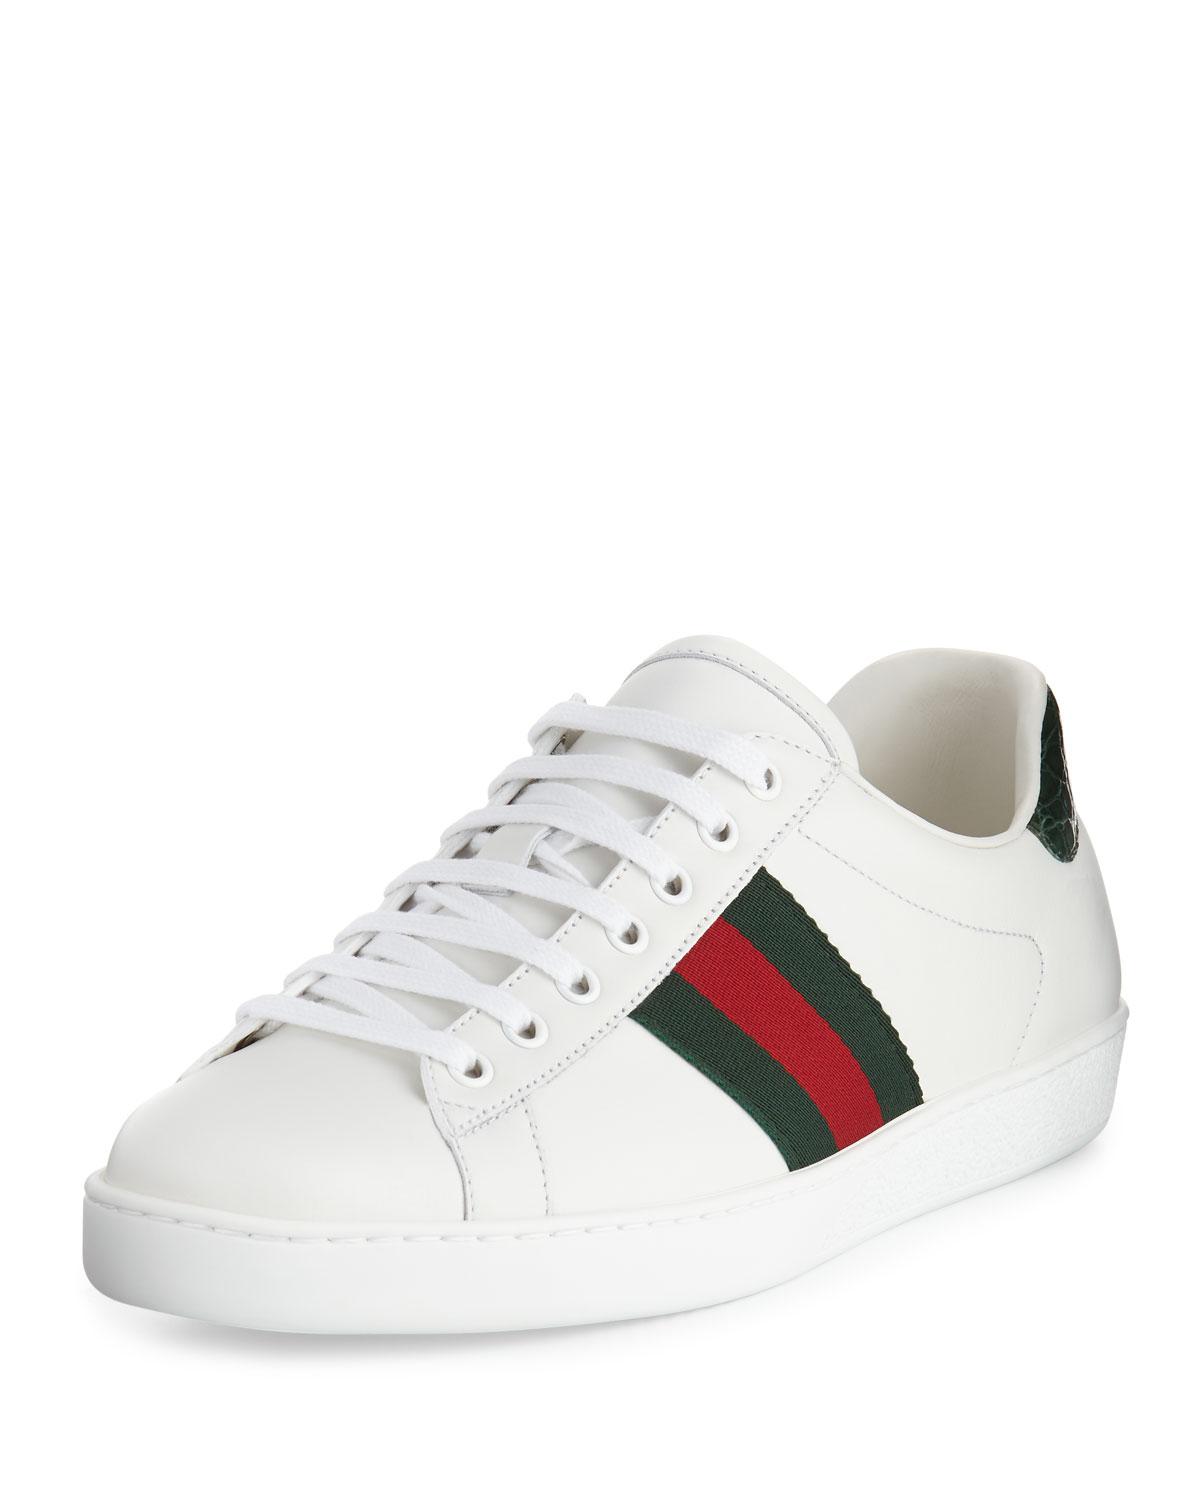 Lyst - Gucci New Ace Leather Low-top Sneaker in White